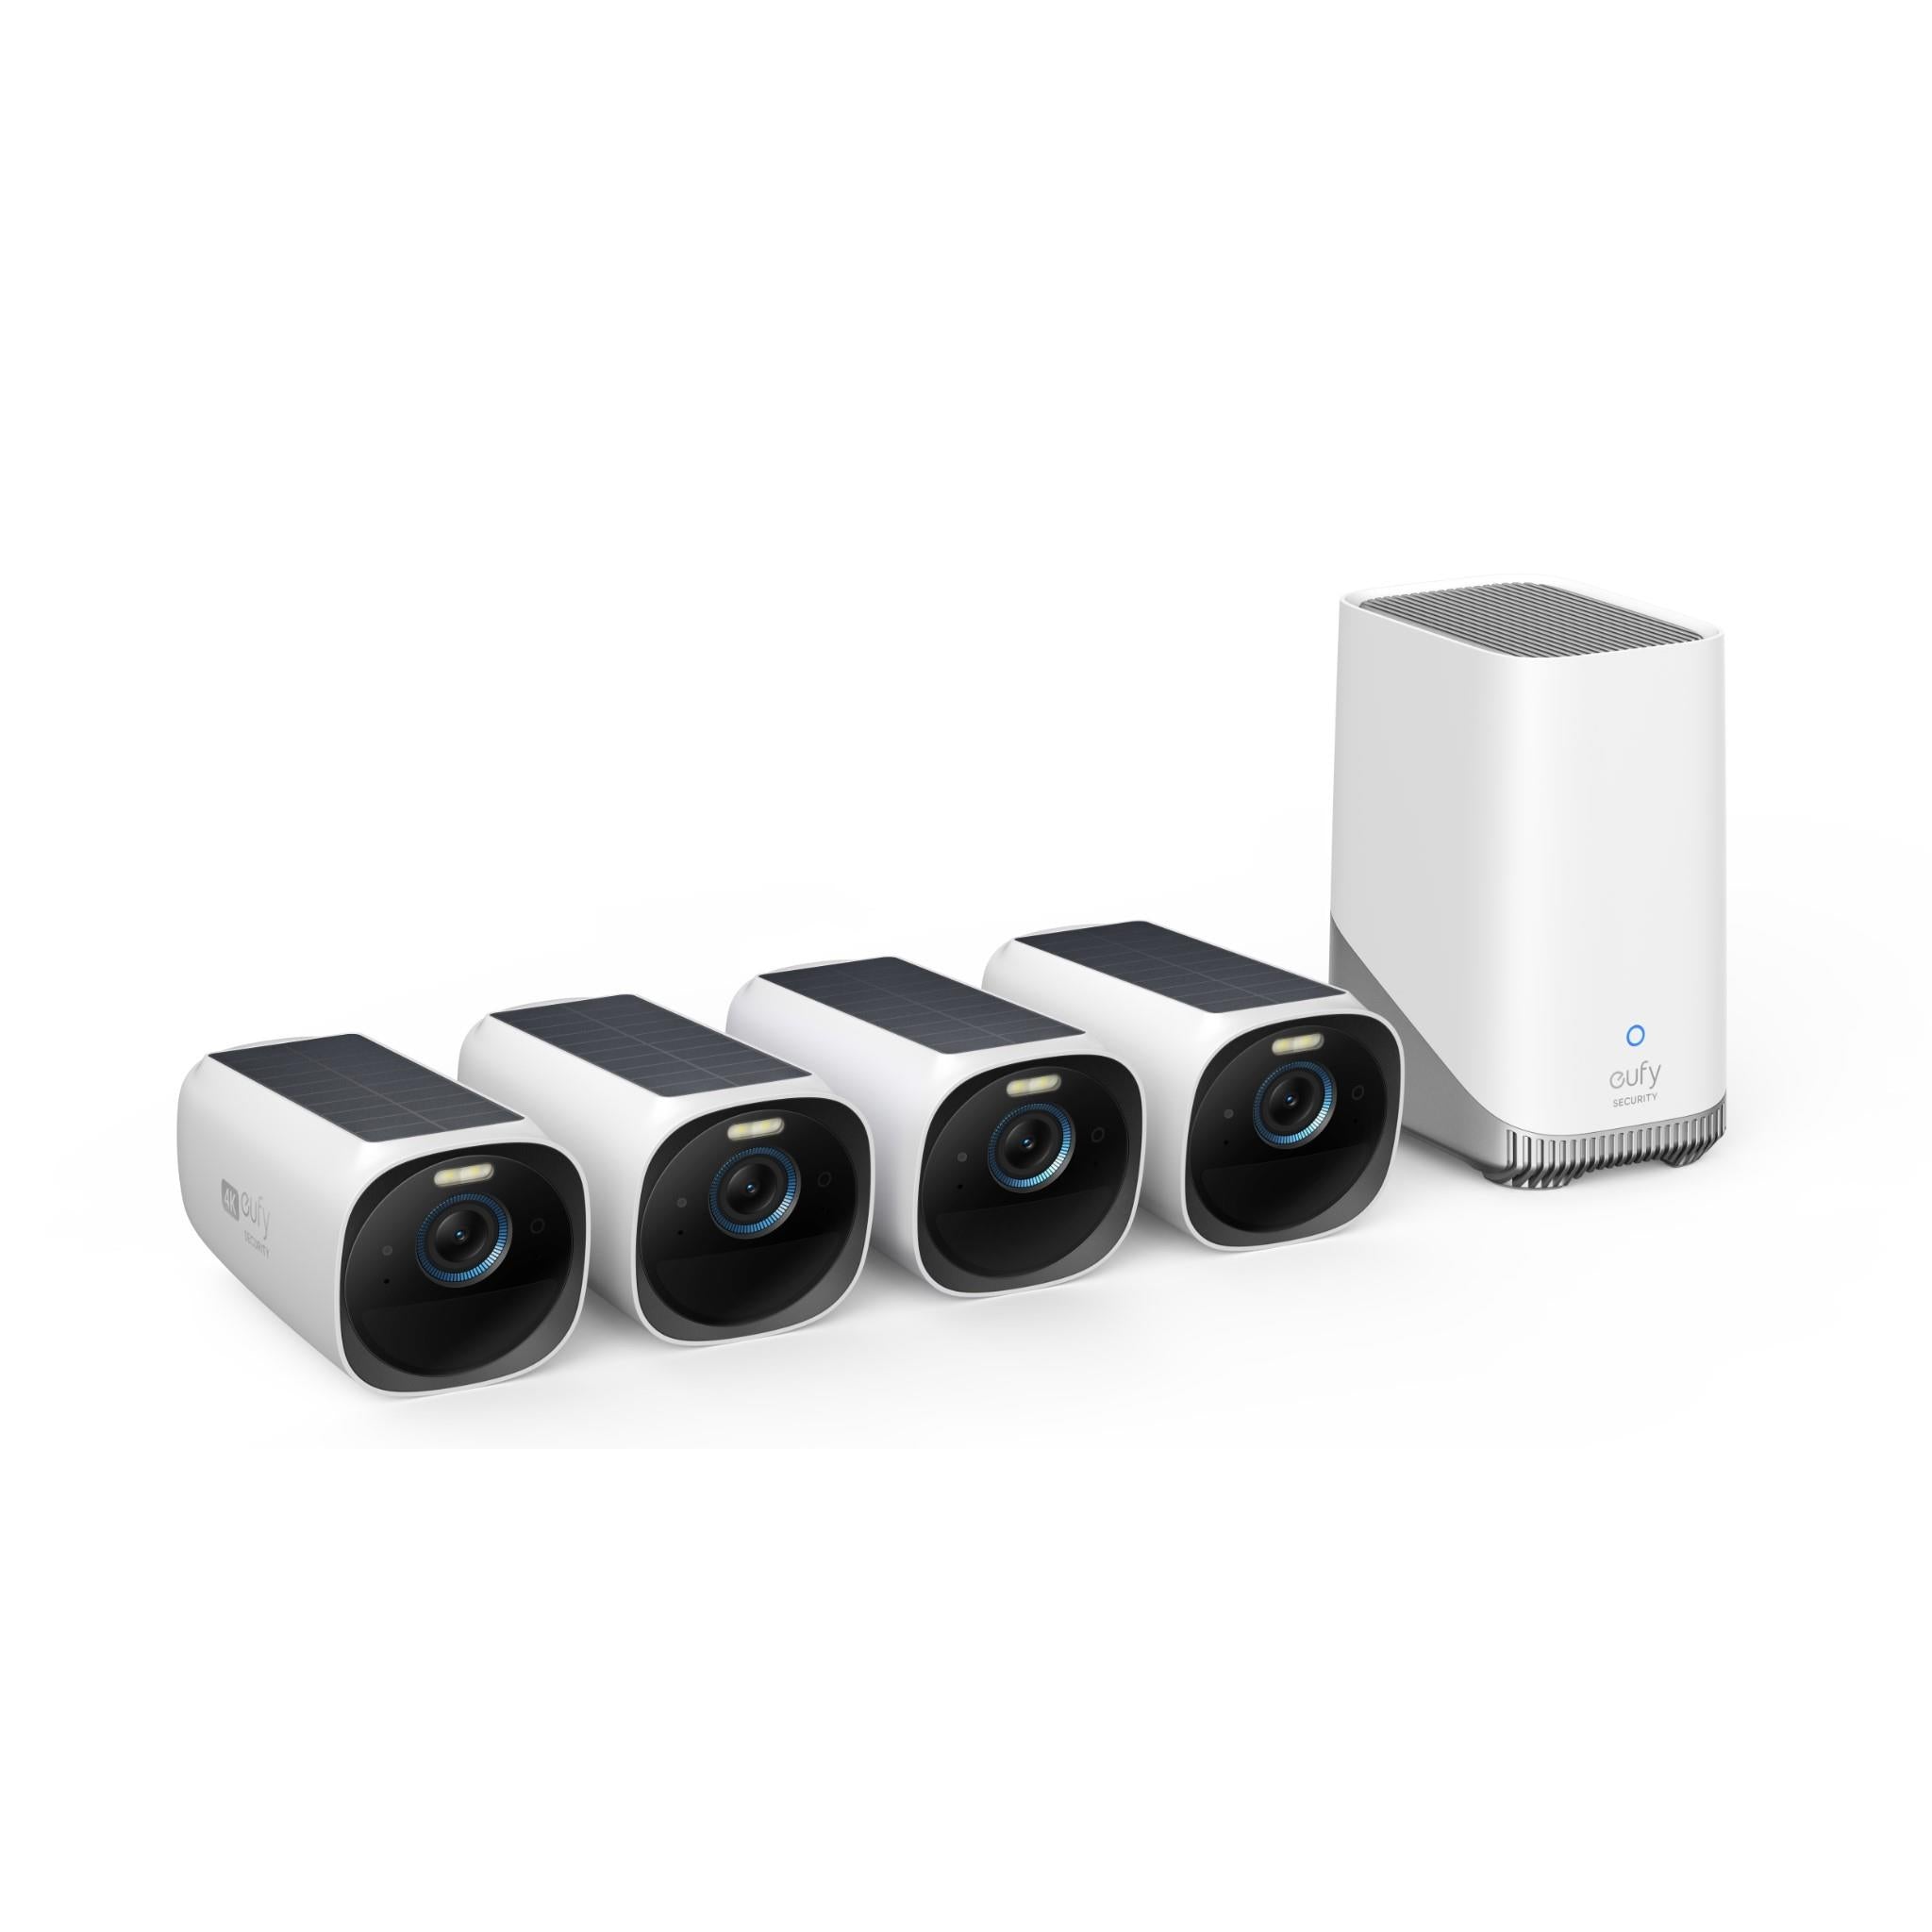 eufy Security eufyCam 3 4K Wireless Home Security System (4-Pack